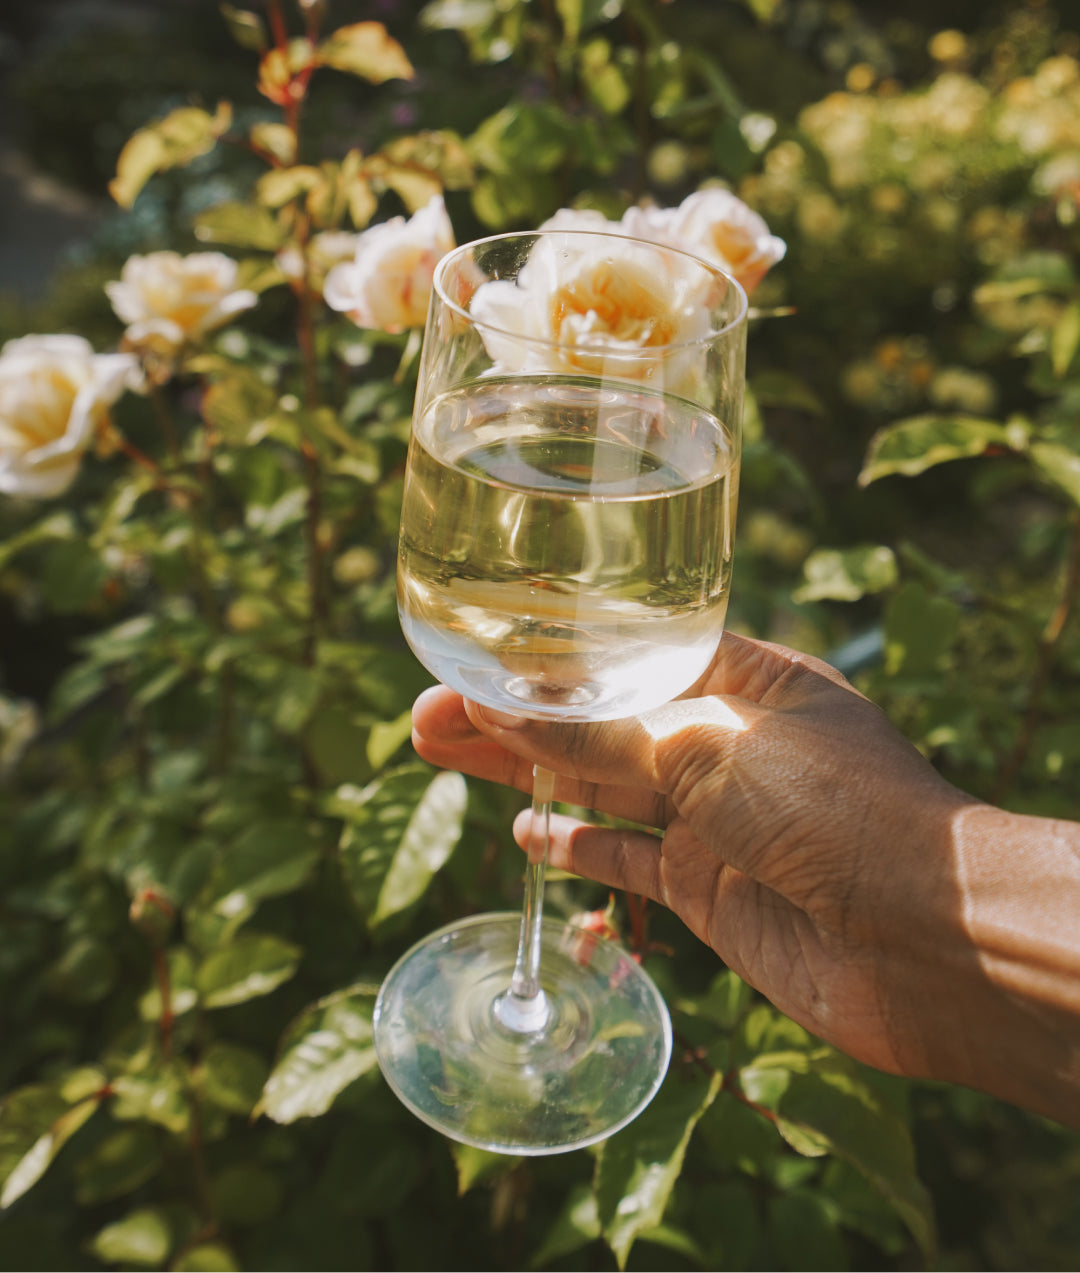 A woman's hand holding a glass of Avaline white wine in the air with greenery and white roses in the background